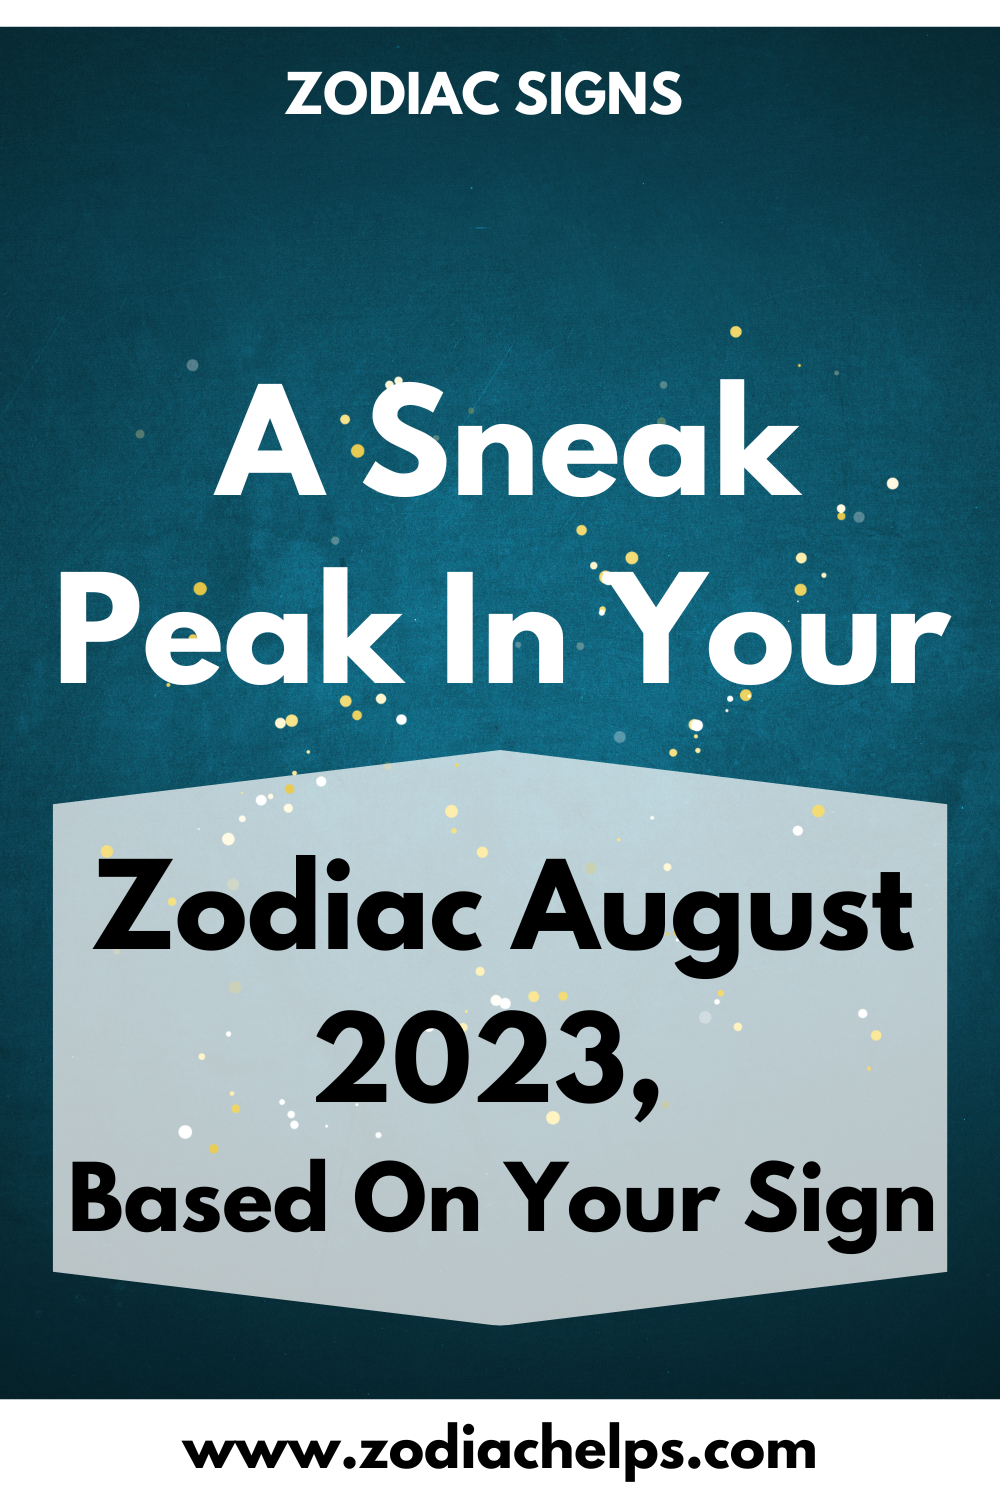 A Sneak Peak In Your Zodiac August 2023, Based On Your Sign